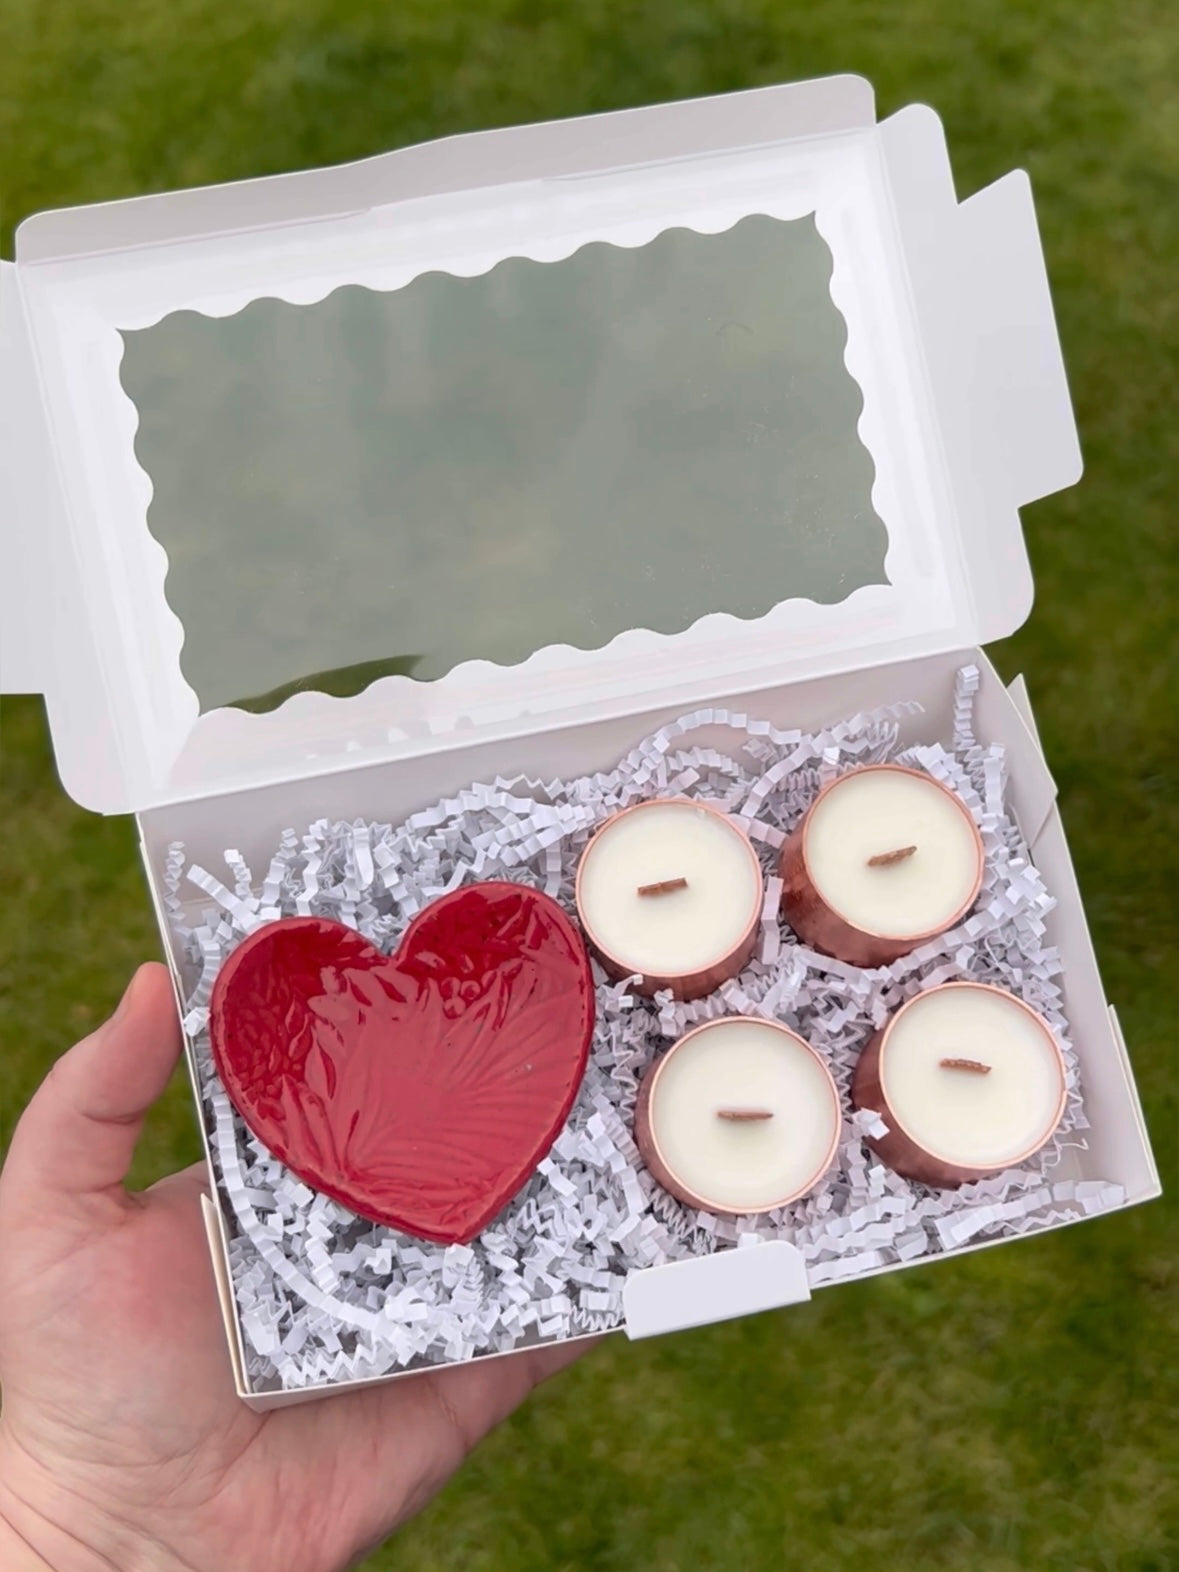 Heart Tealight Giftset - Limited Edition